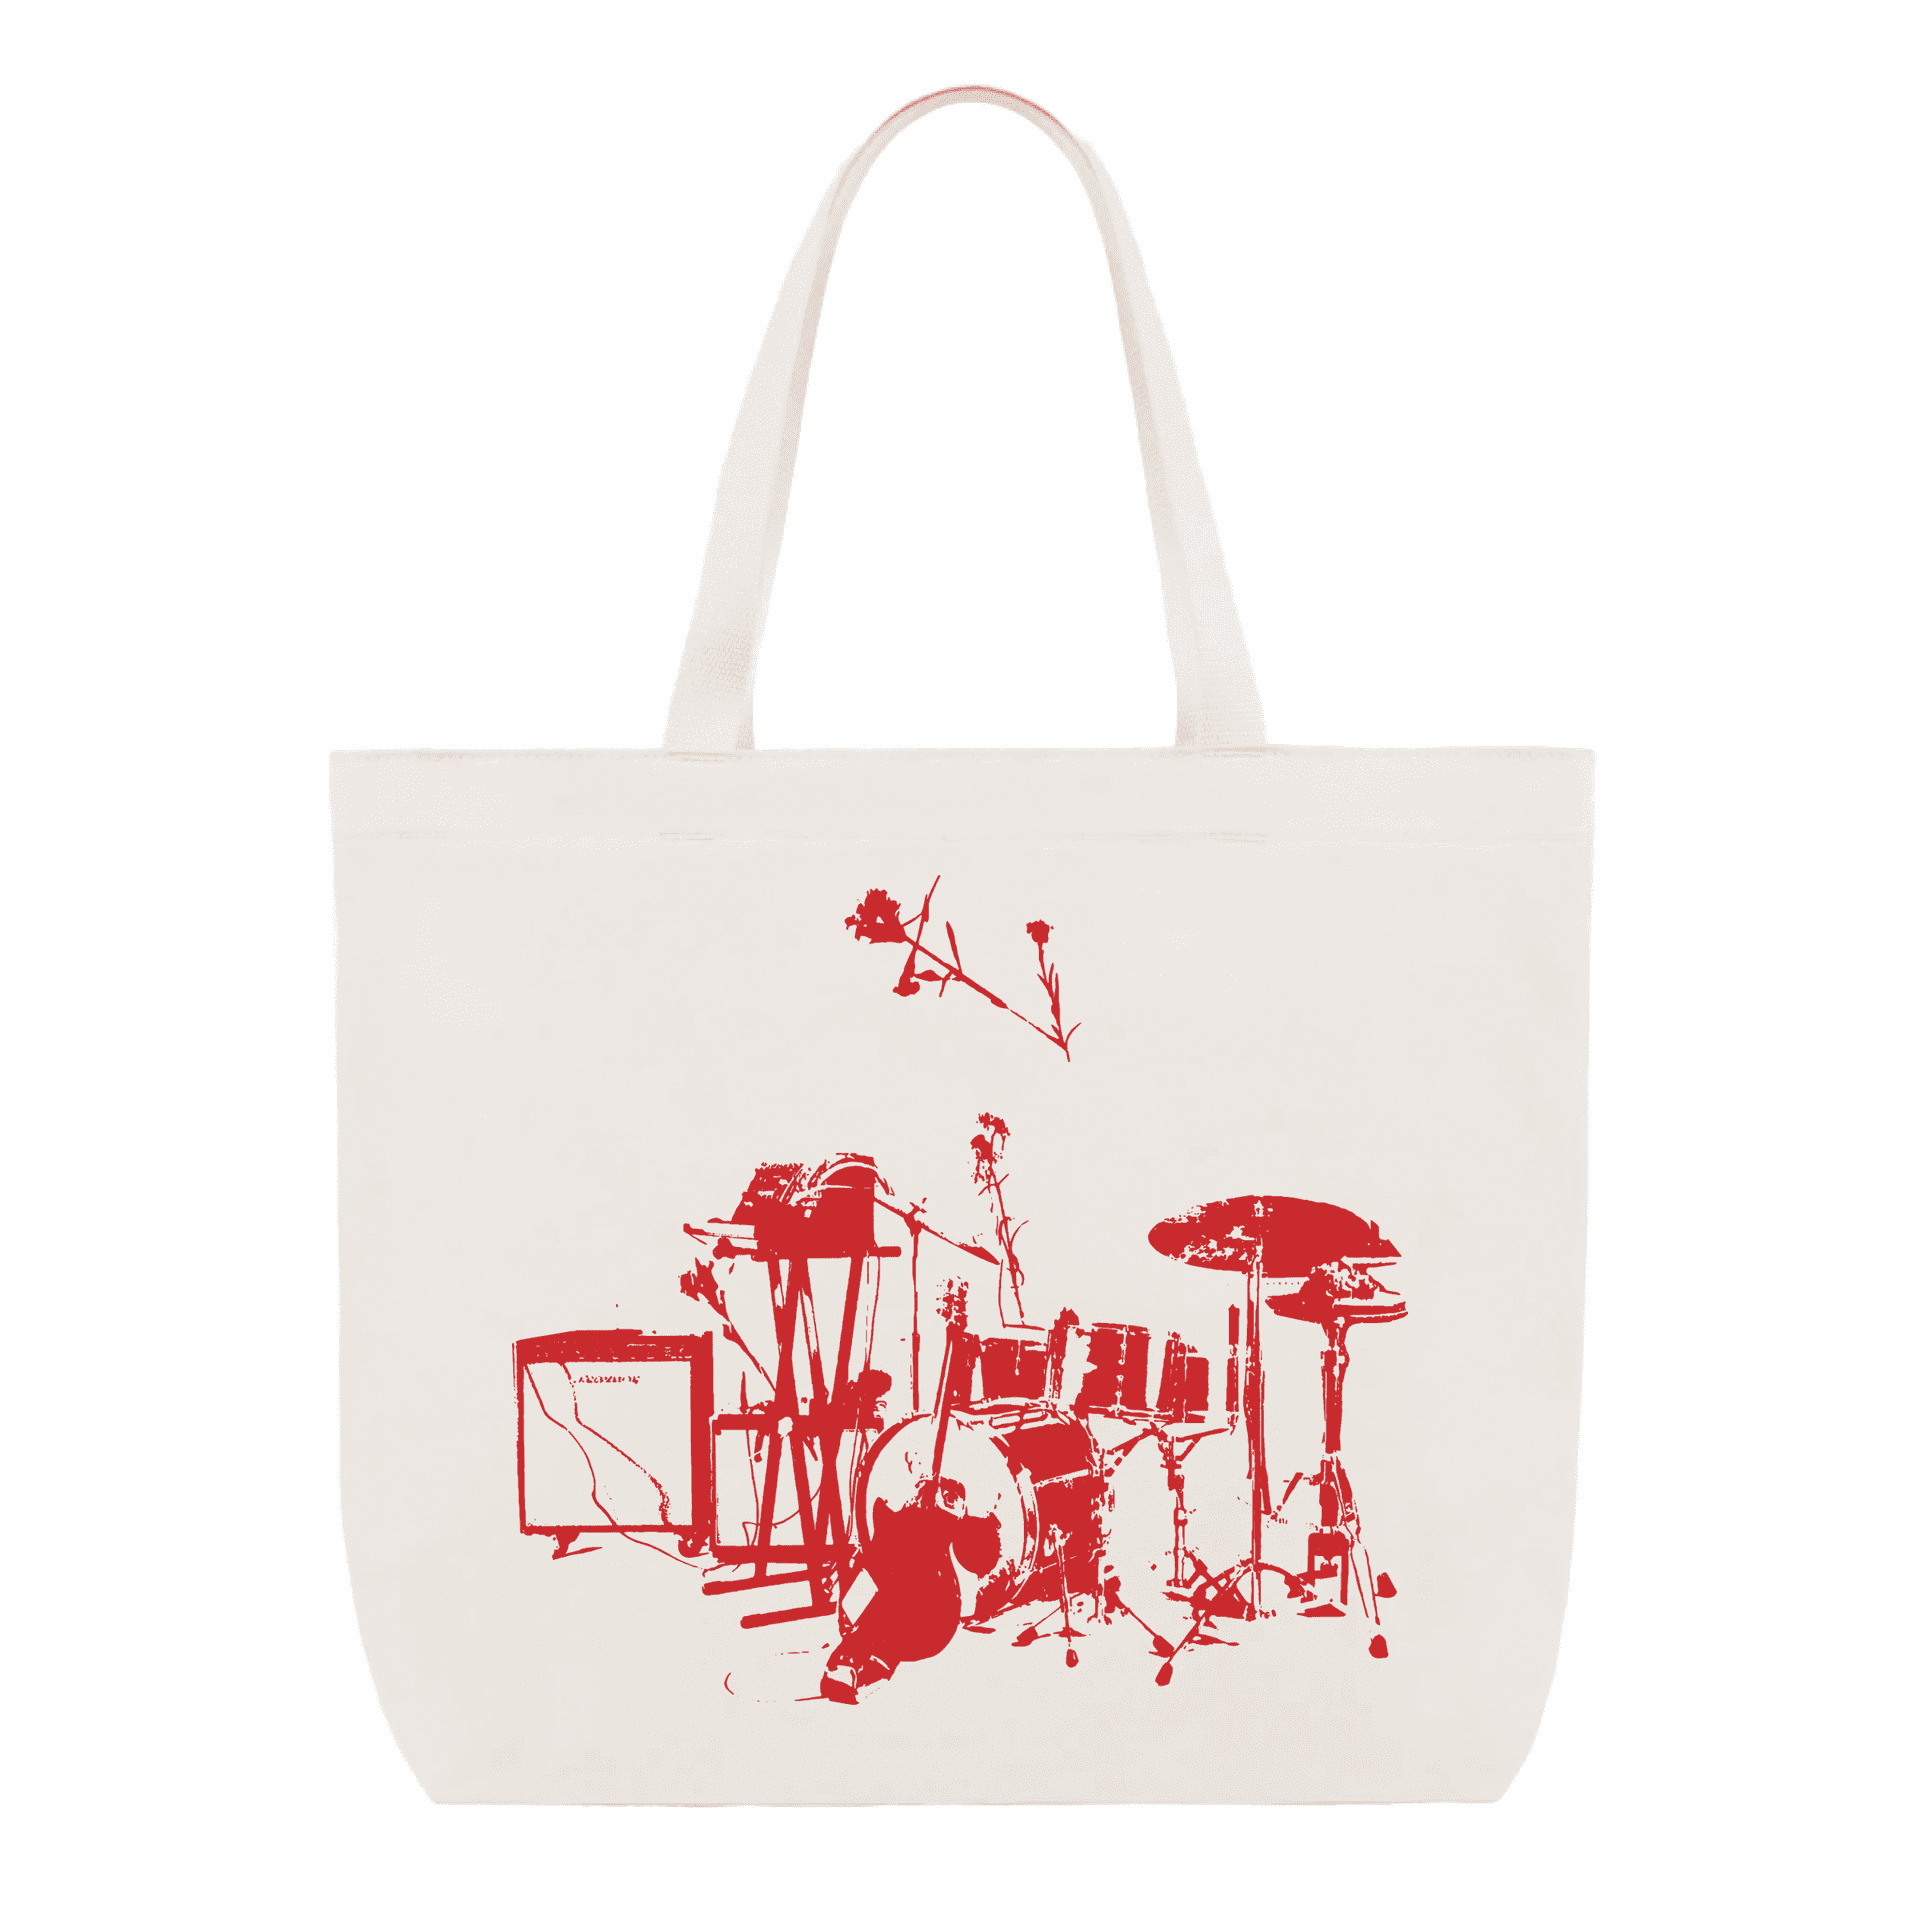 ‘SHADOW OFFERING’ TOTE BAG - image 1 of 3